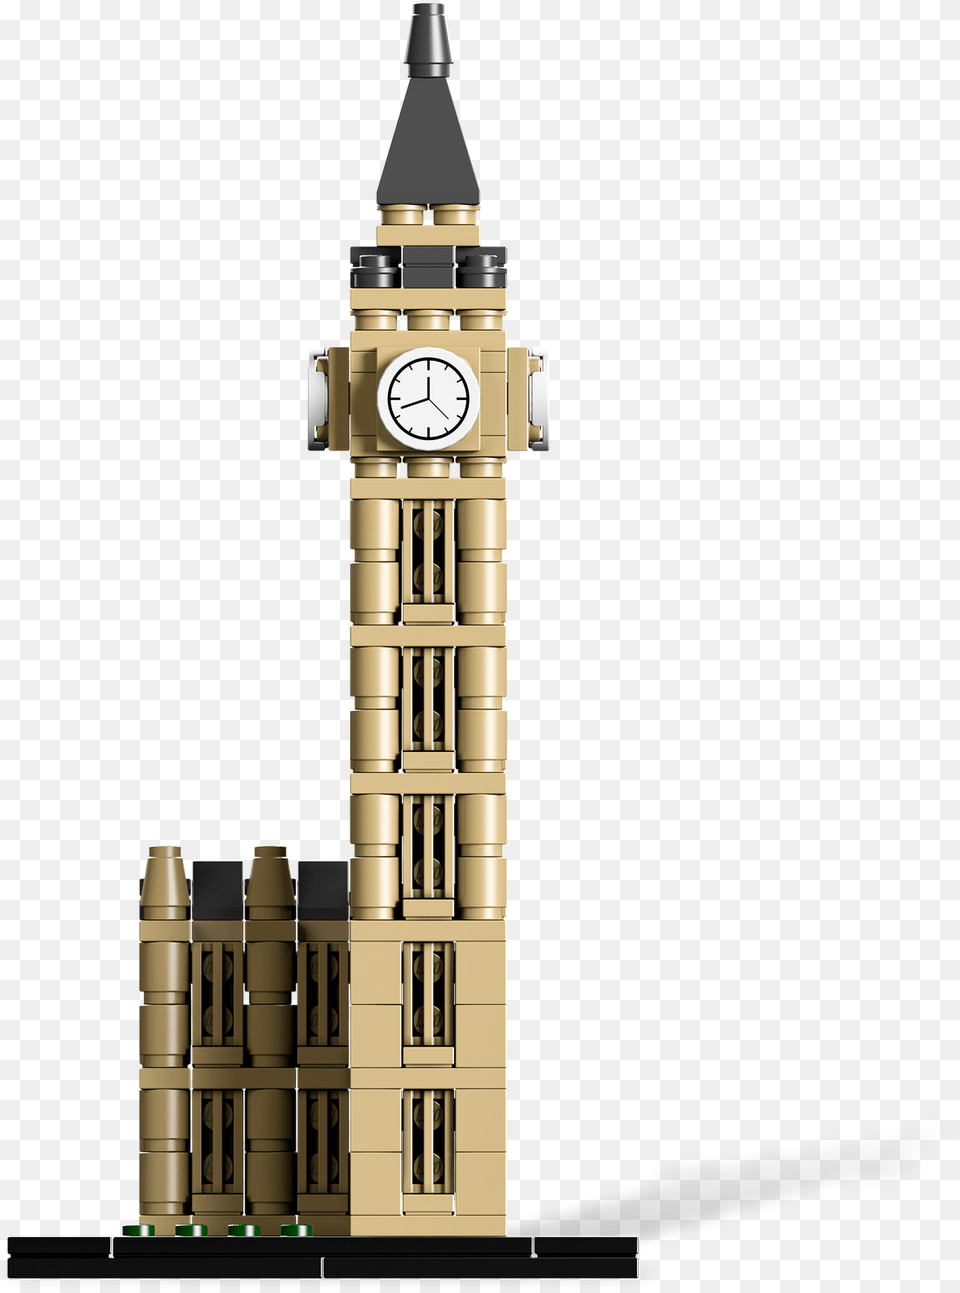 Lego Architecture Big Ben, Building, Clock Tower, Tower Free Transparent Png